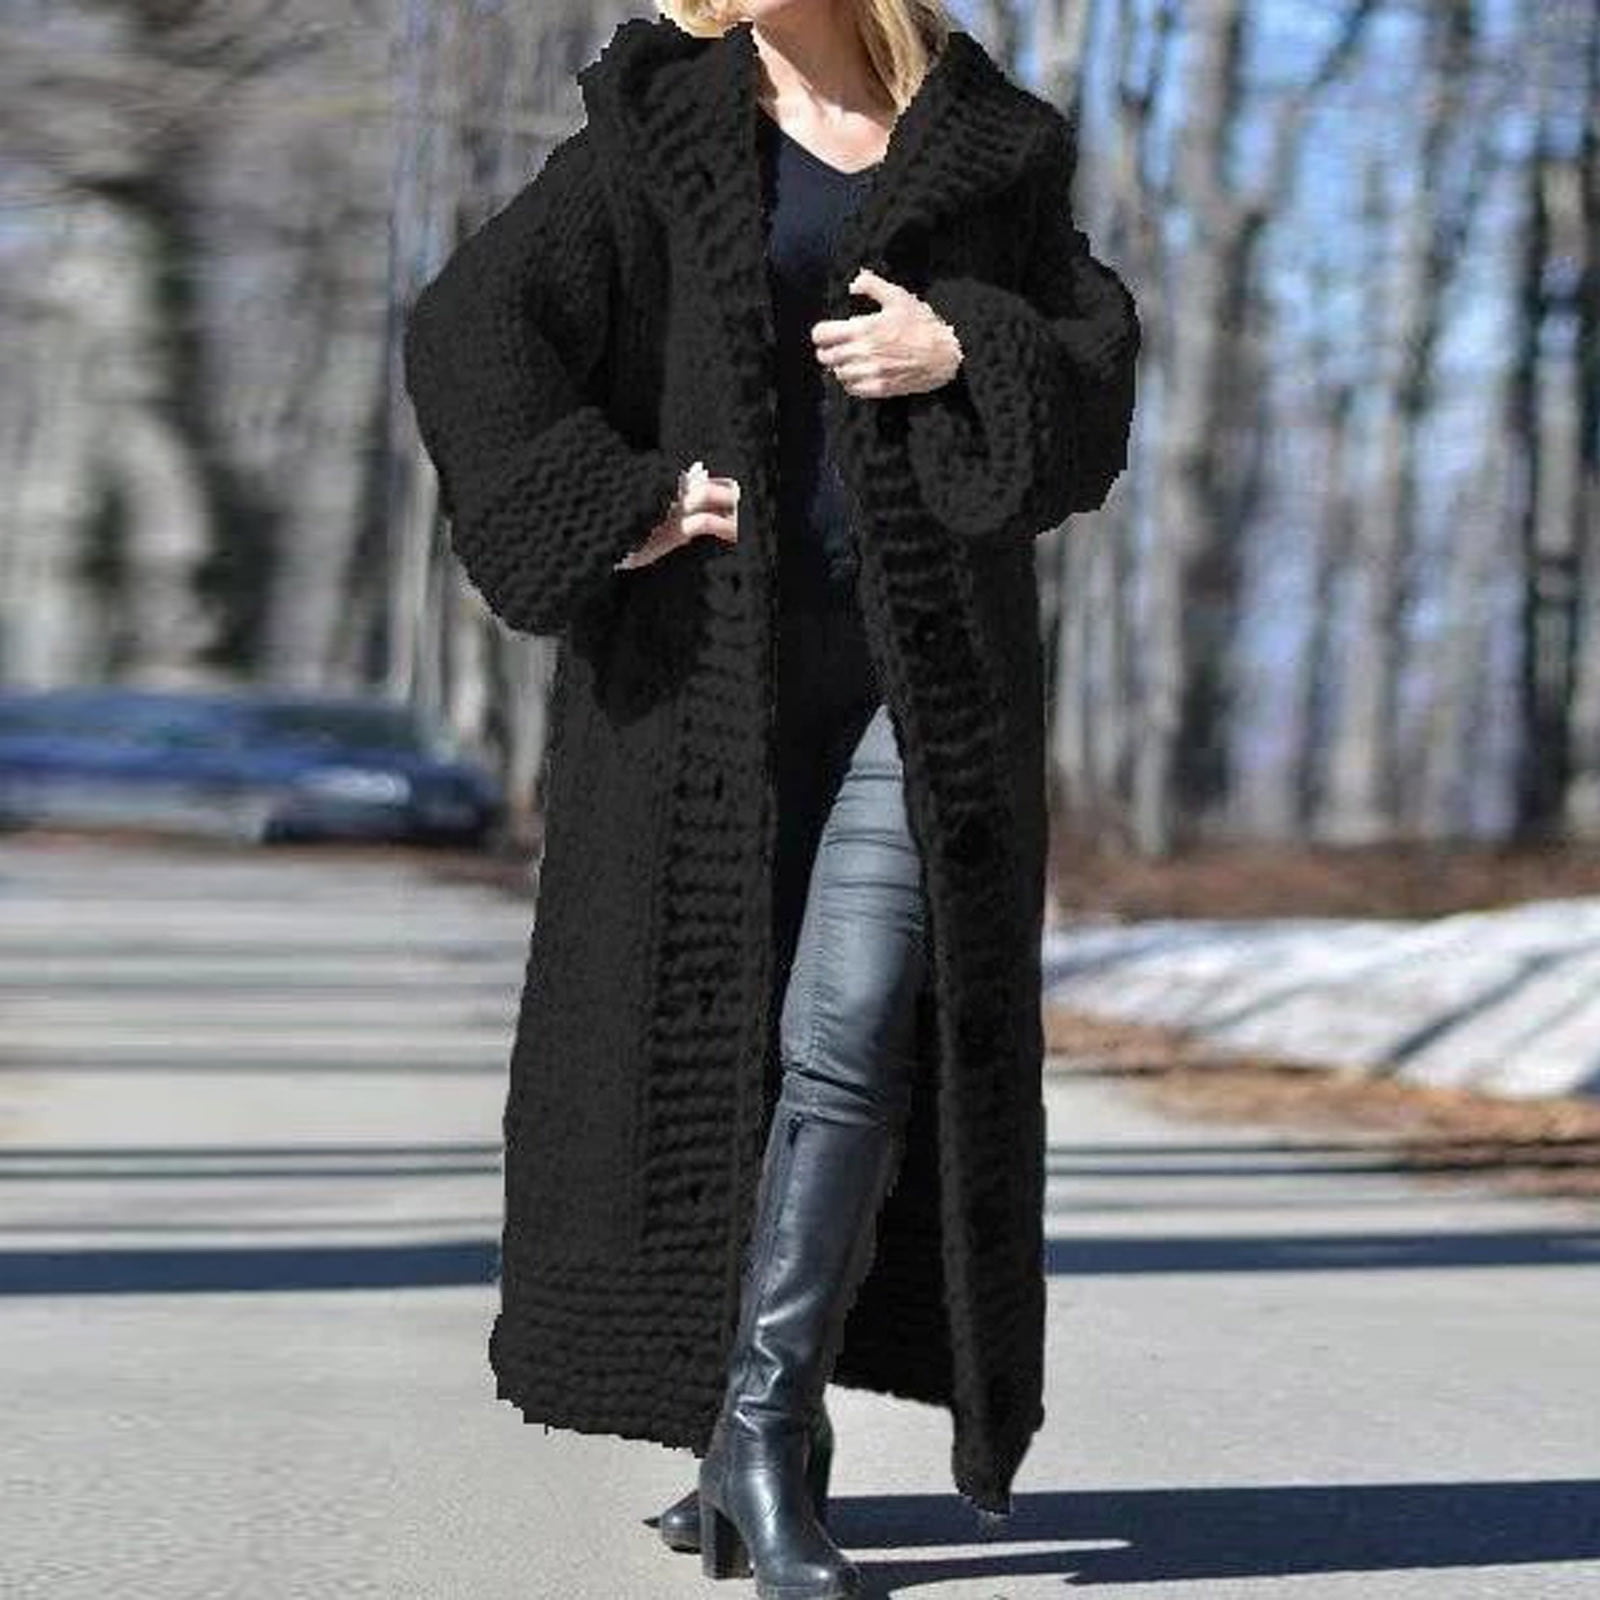 Under The Knee Length Coats for Women Knit Sweater with Hood Long Sleeve Open Front Warm Long Cardigans with Pockets 